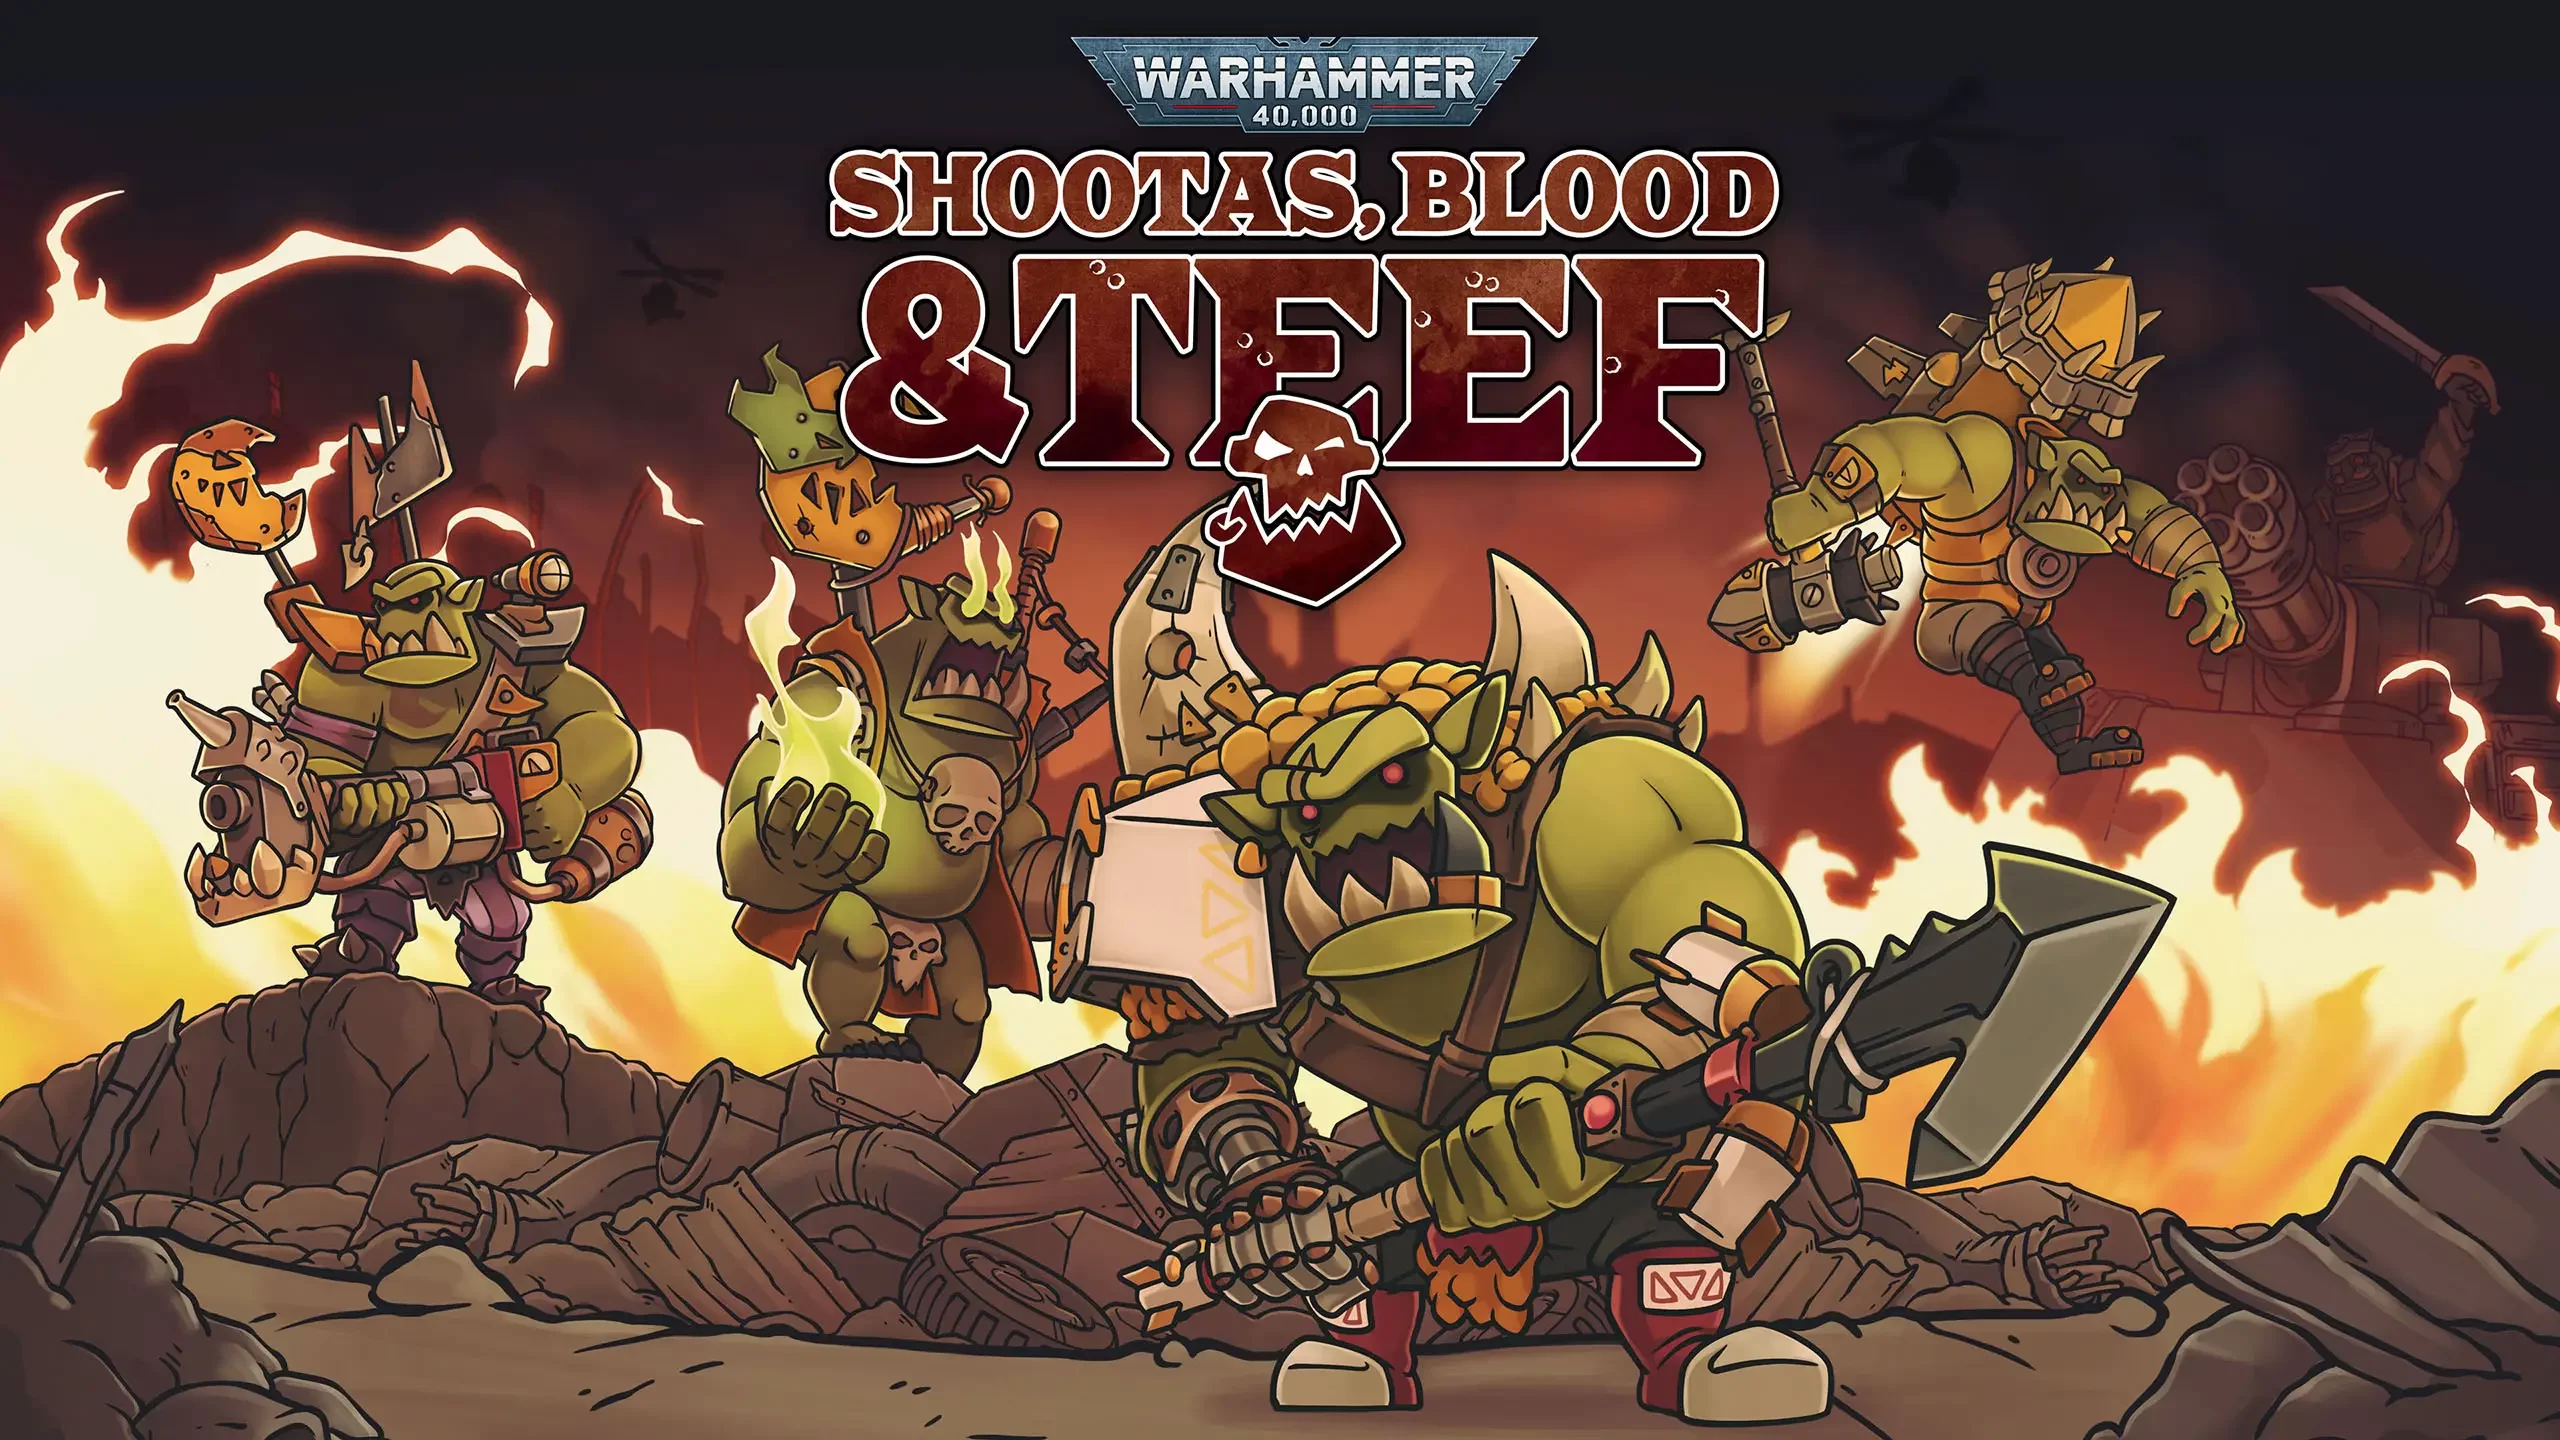 warhammer-40000-shootas-blood-and-teef-offer-l9p171-2364956